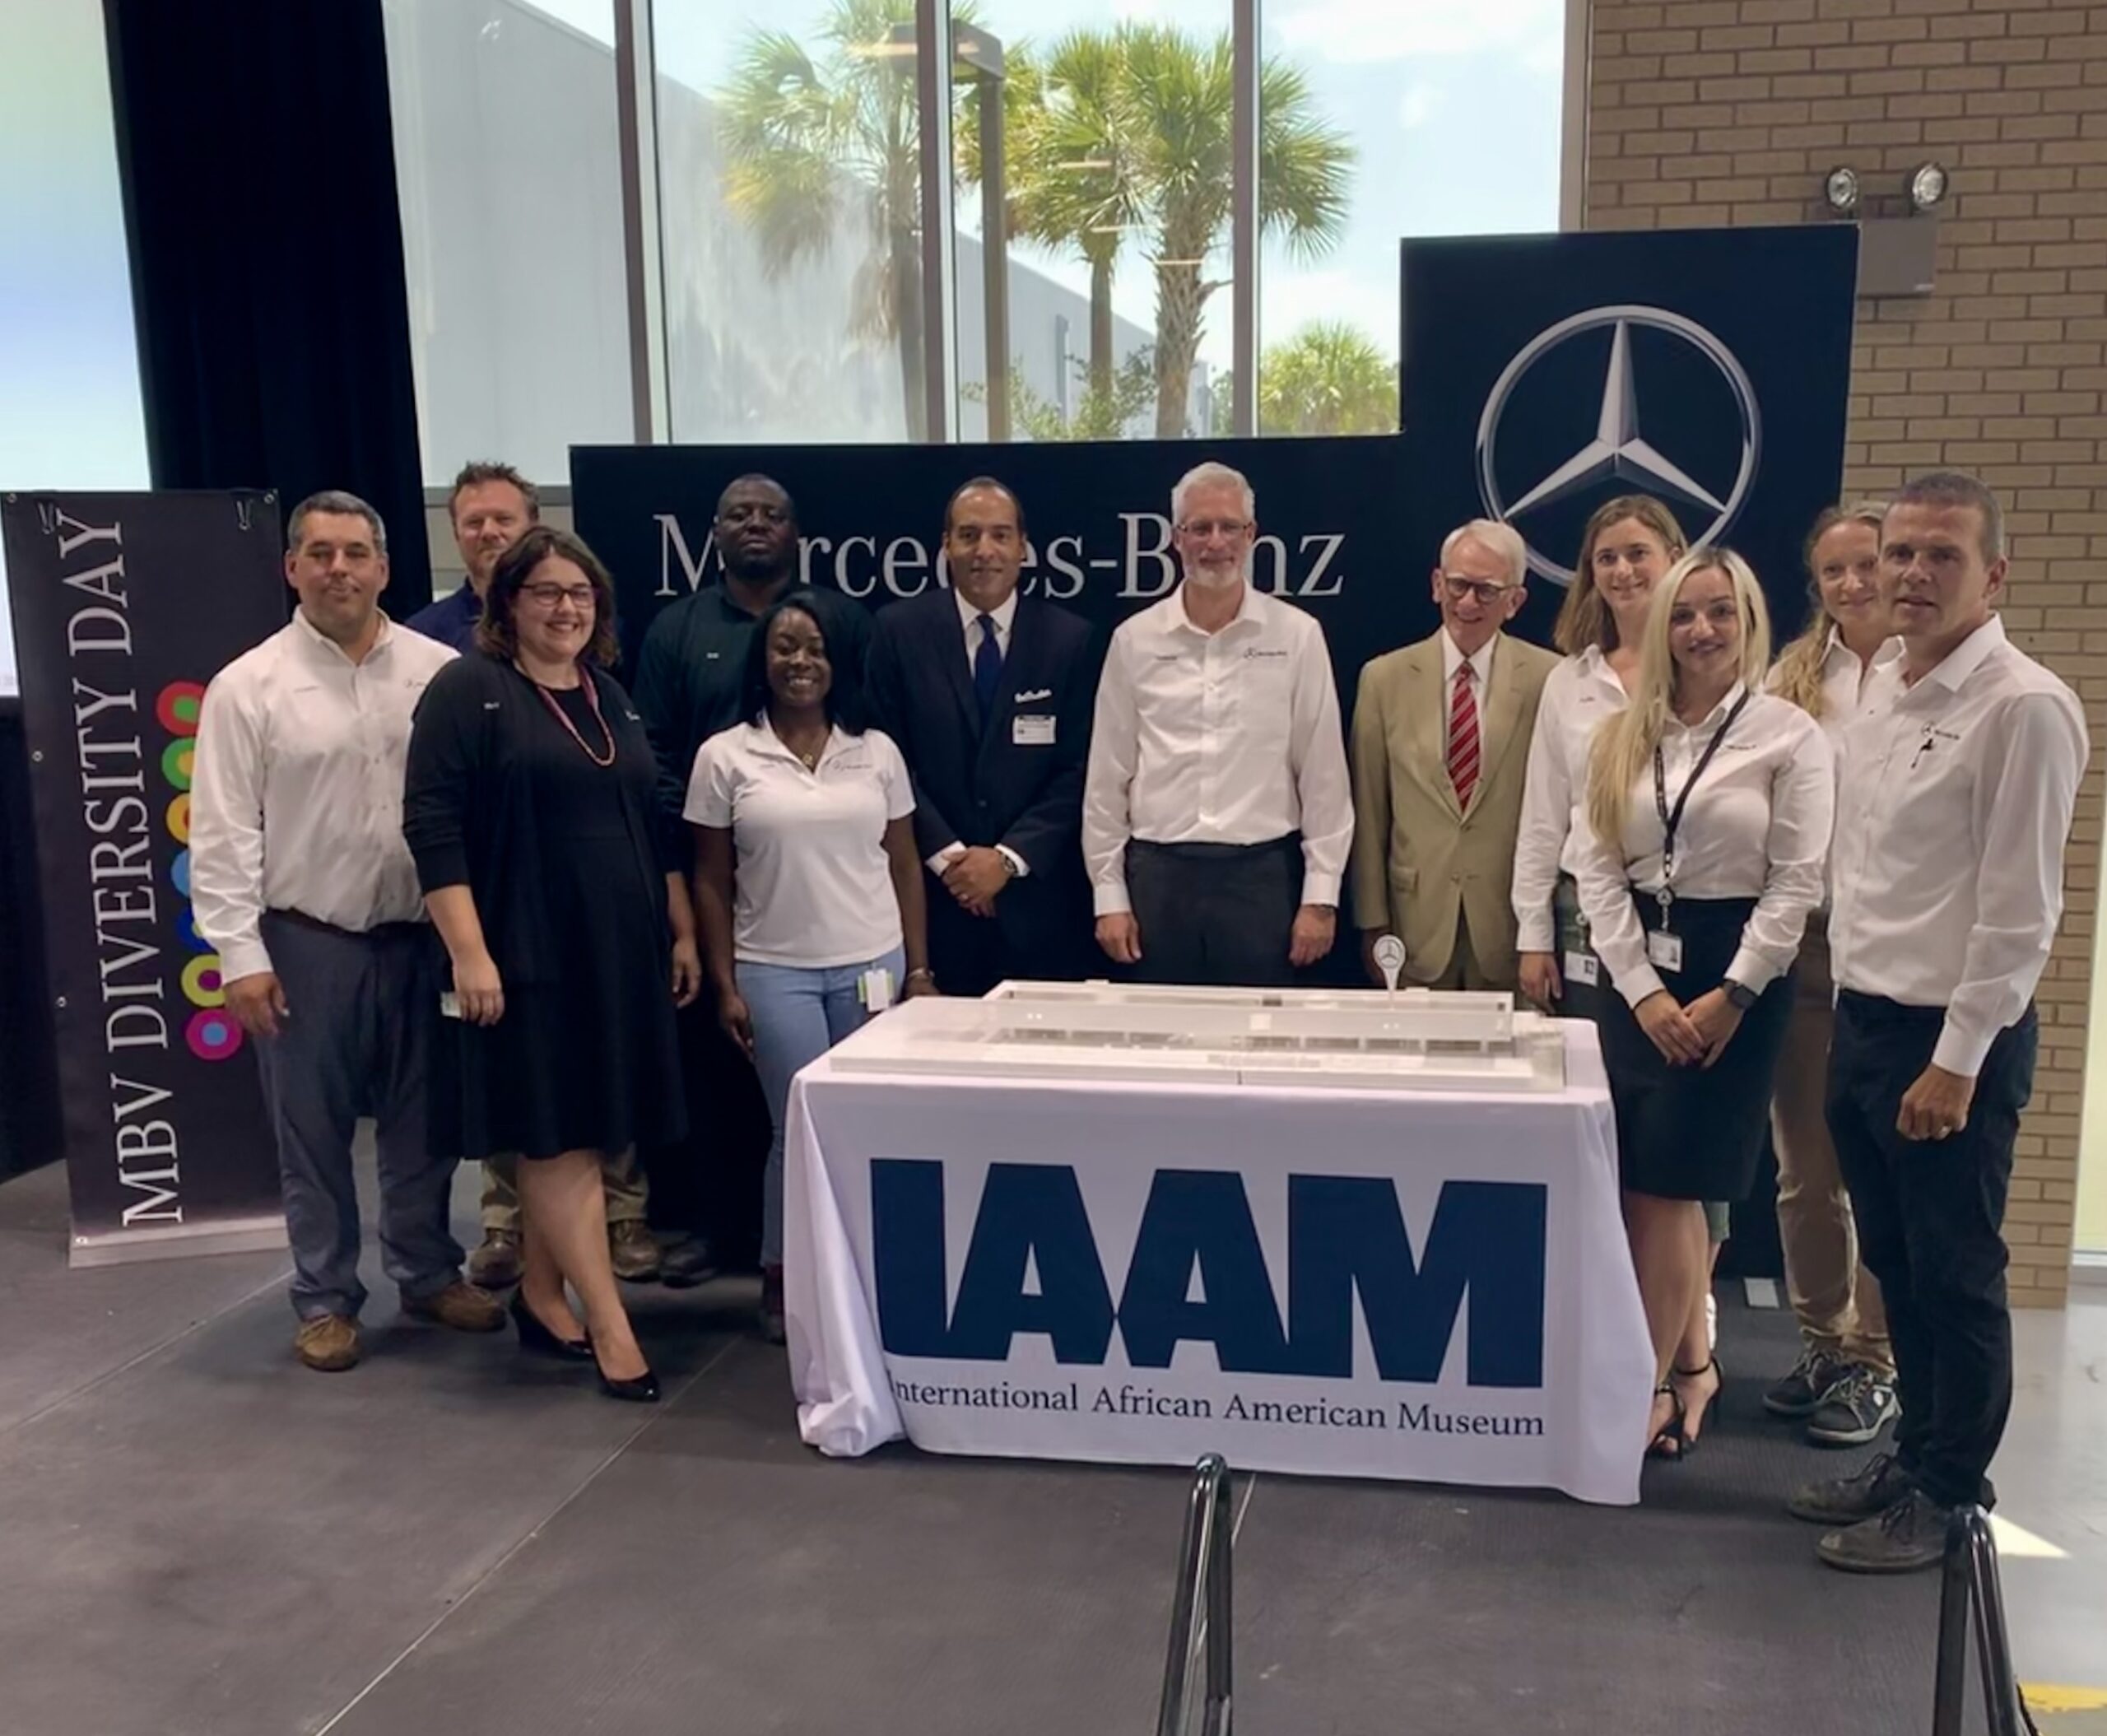 MBV and IAAM Team Members at Diversity Day Event on May 30, 2019